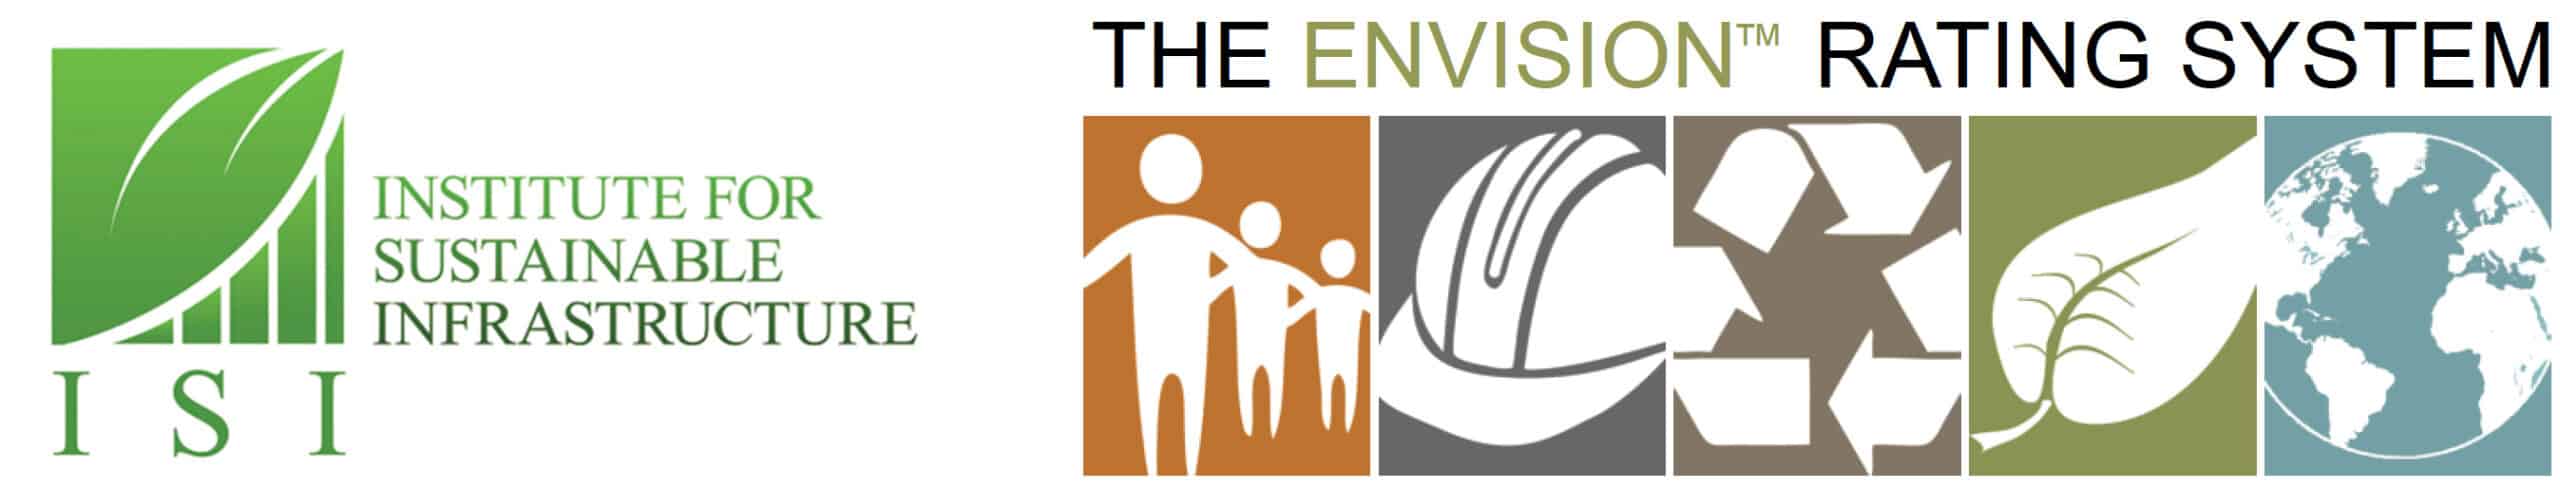 Building Community Resilience - ISI logo with Envision Rating System model